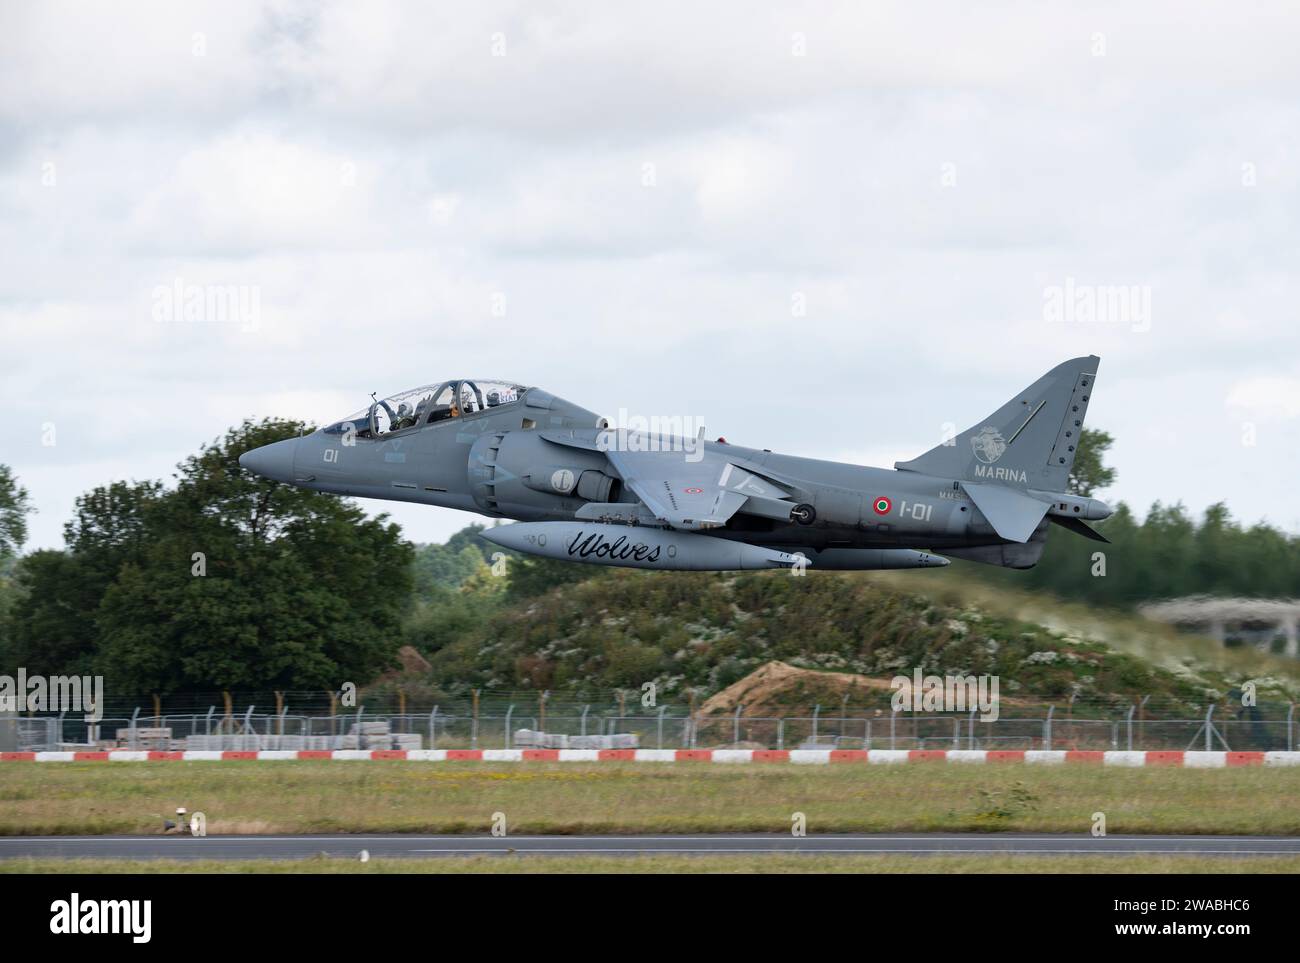 Spanish Navy McDonnell Douglas AV-8B Harrier II (Matador) Jump Jet Fighter Plane MM55032 departs RAF Fairford in Southern England after the RIAT Stock Photo